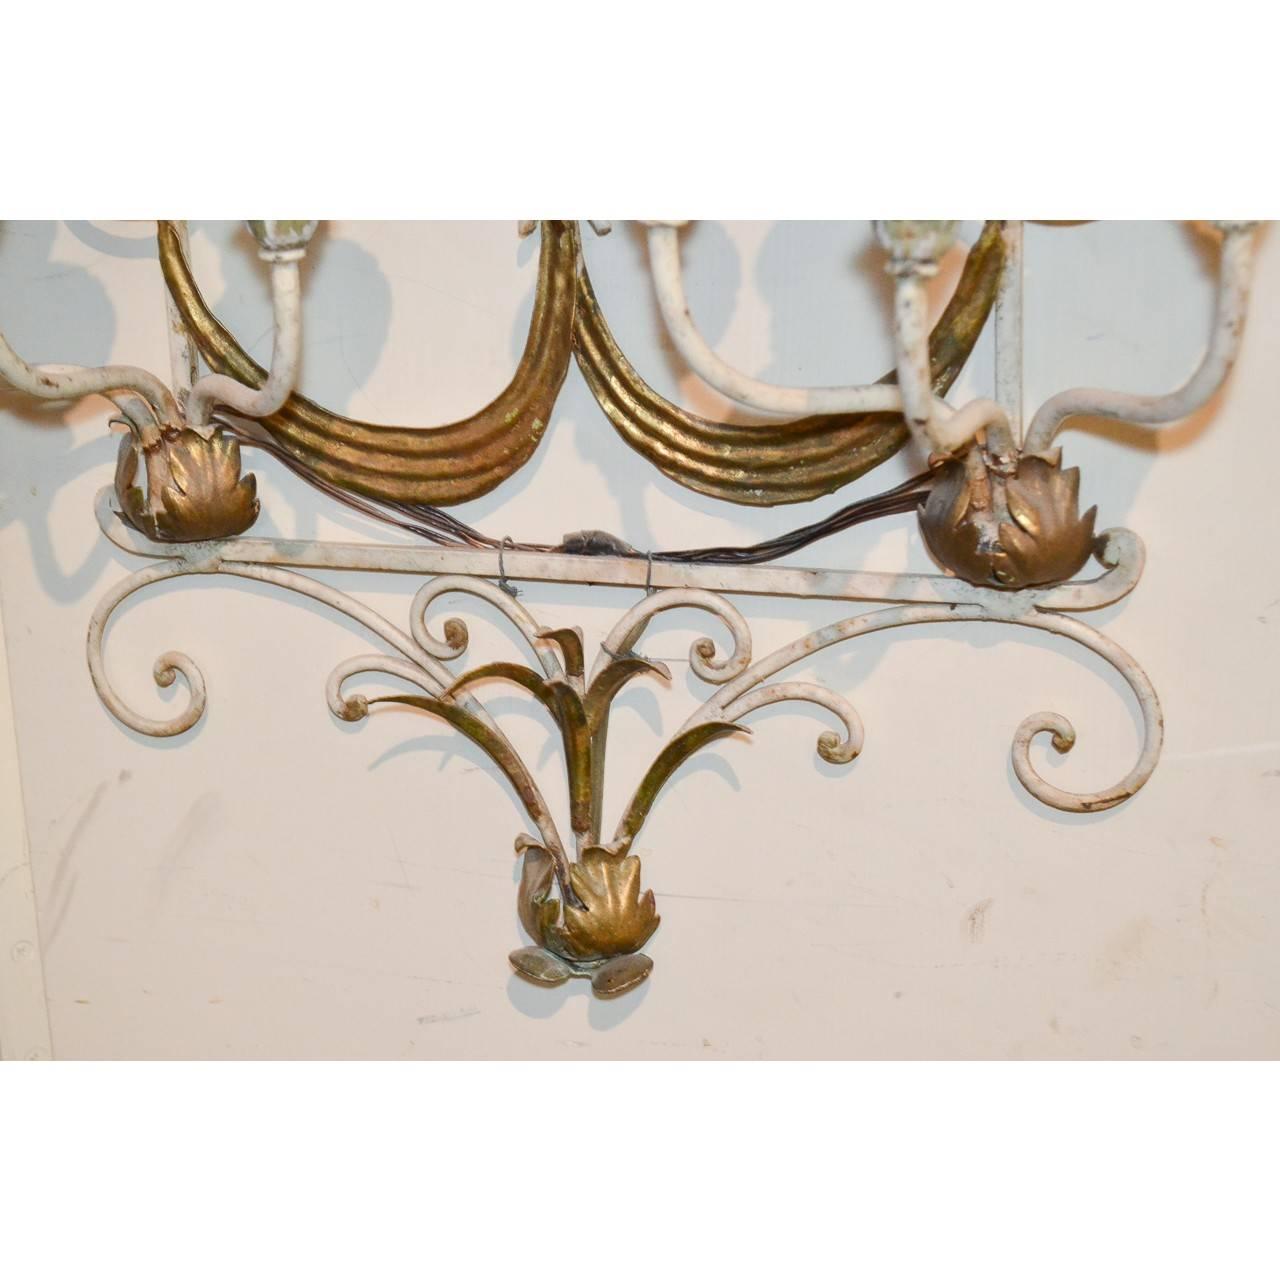 French 1920s Exceptional Parisian Metal Candelabra Sconce